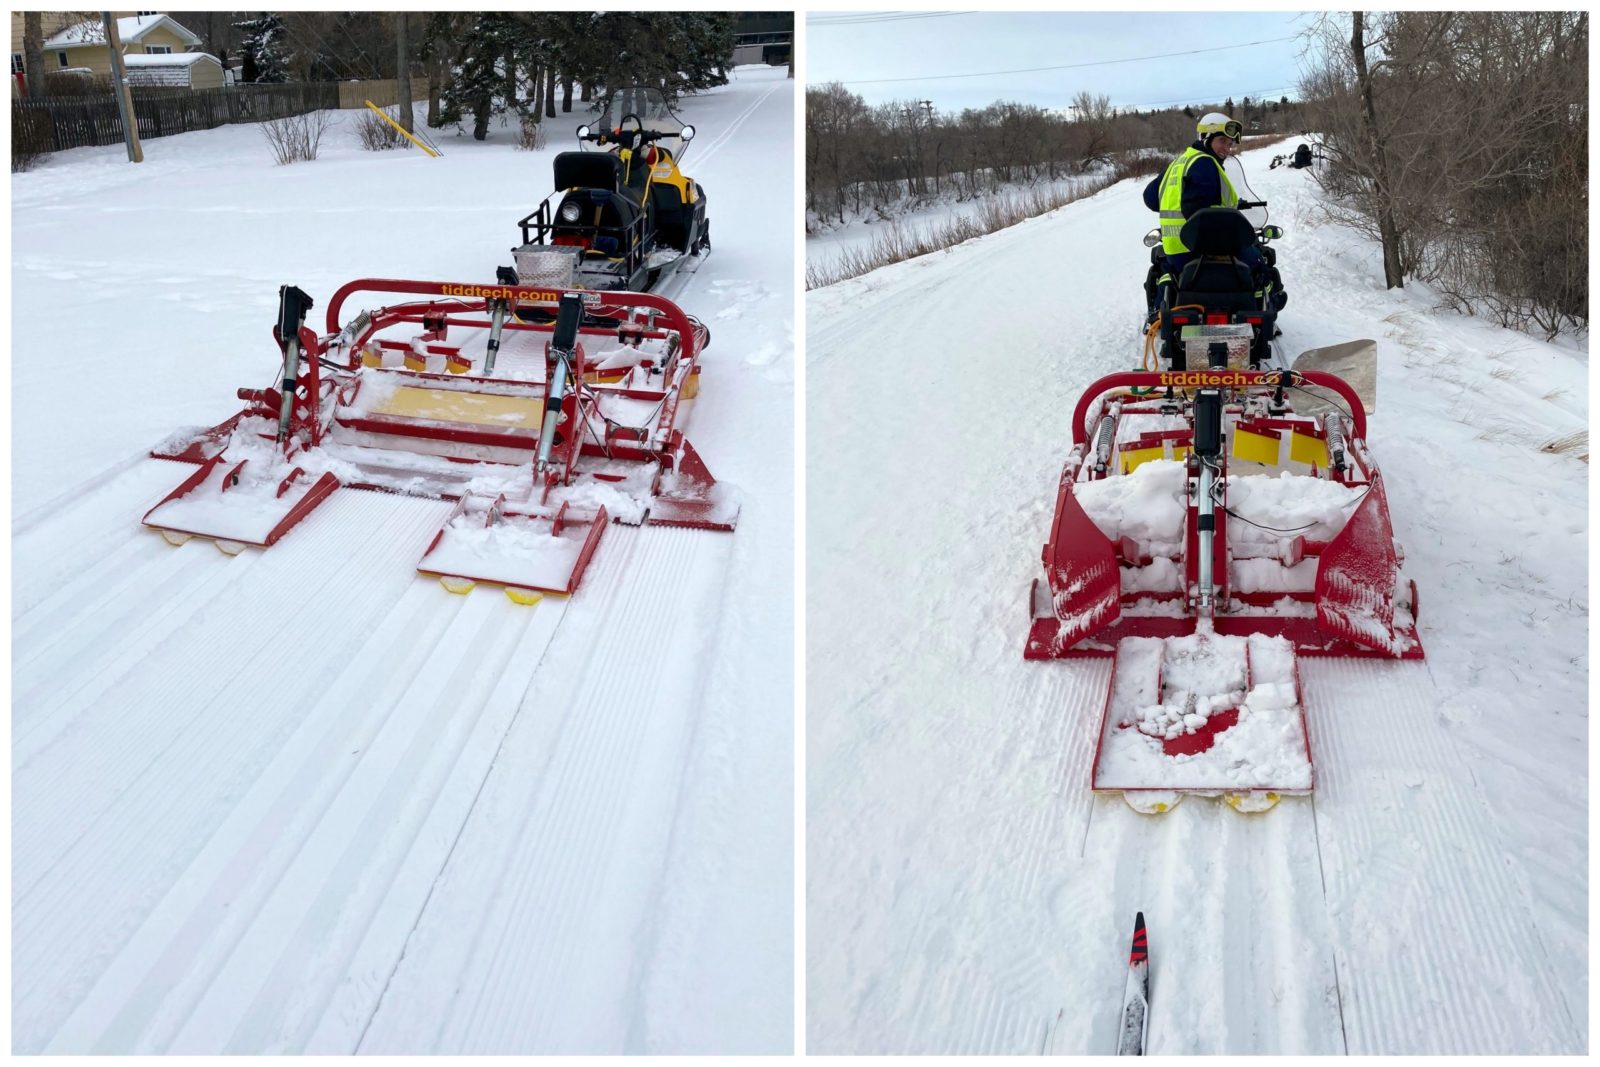 New Grooming Equipment at Kinsmen and Les Sherman Parks